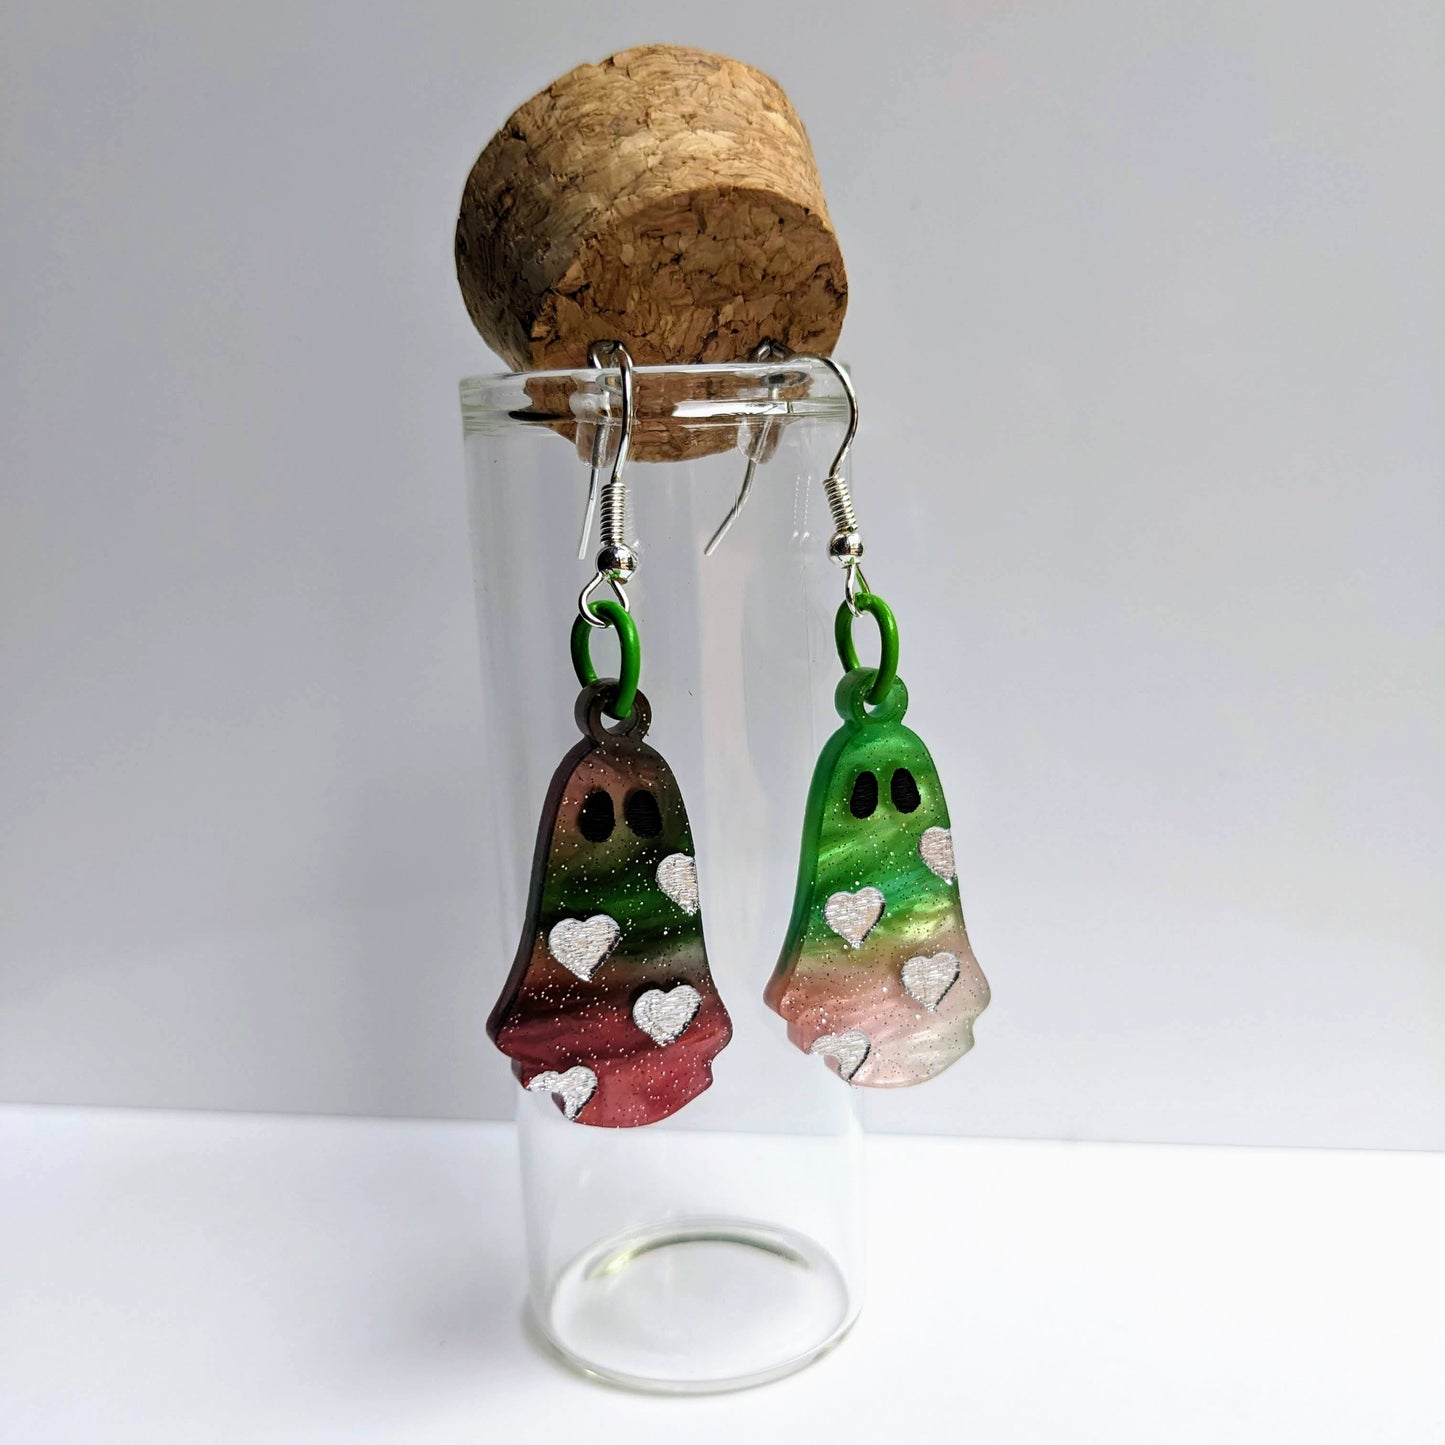 alt="Red and green glitter acrylic heart ghost earrings"